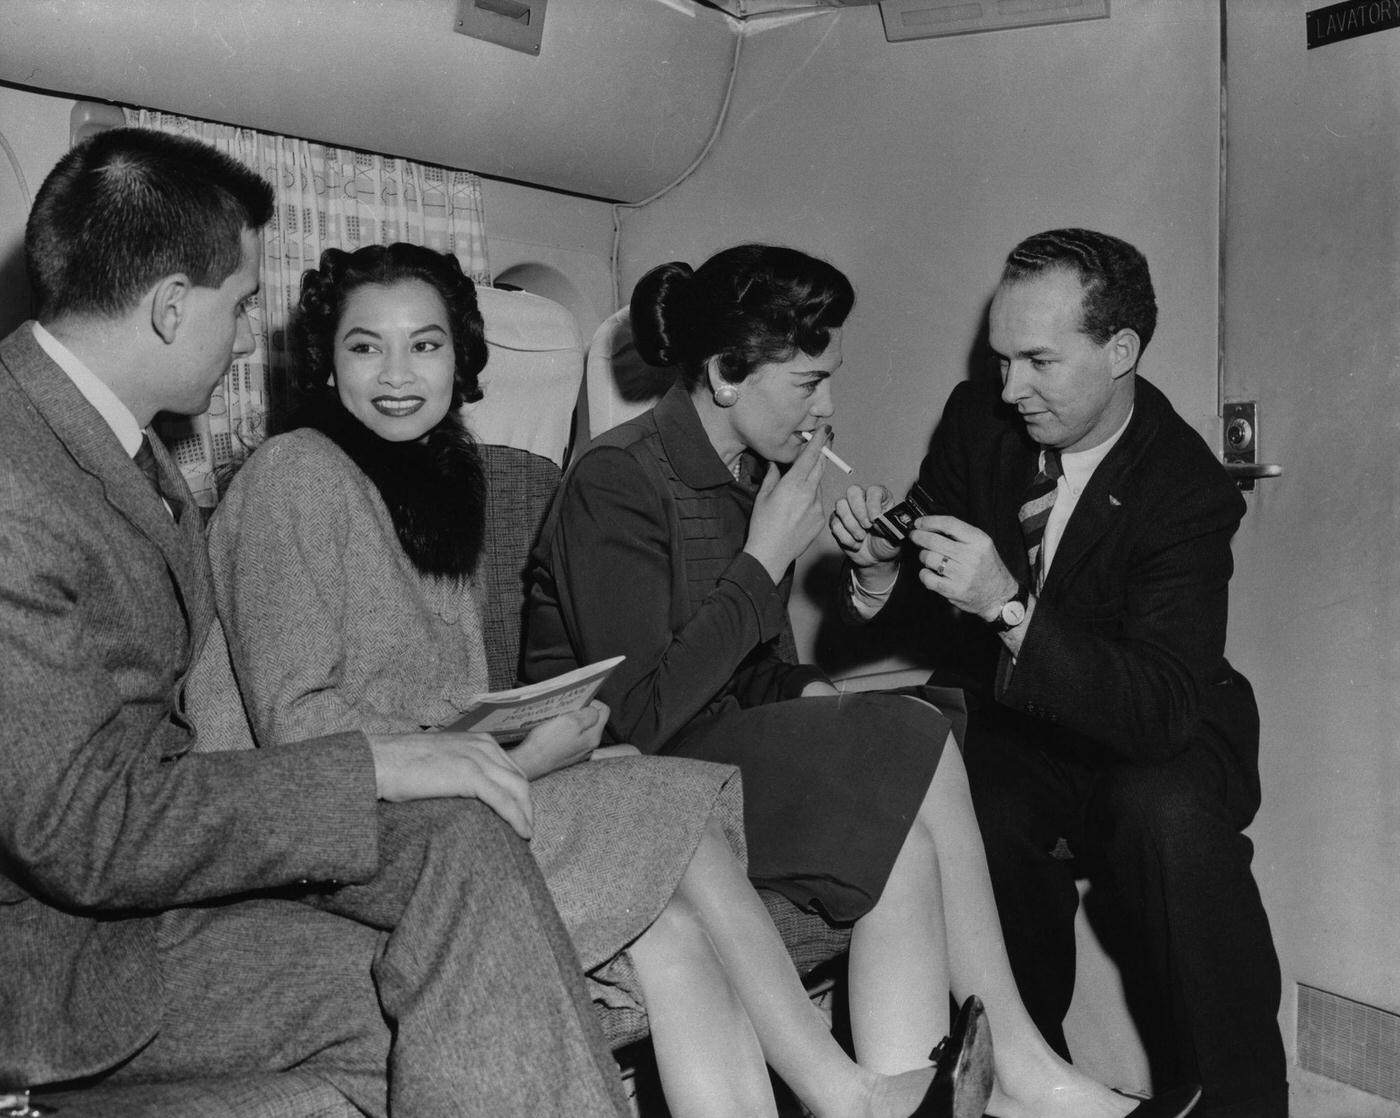 Passengers enjoying a relaxing smoke on a Transocean Air lines Boeing 377 Stratocruiser in the mid-1950s. Transocean Air lines was a pioneer discount airline that flew between 1946 and 1962.